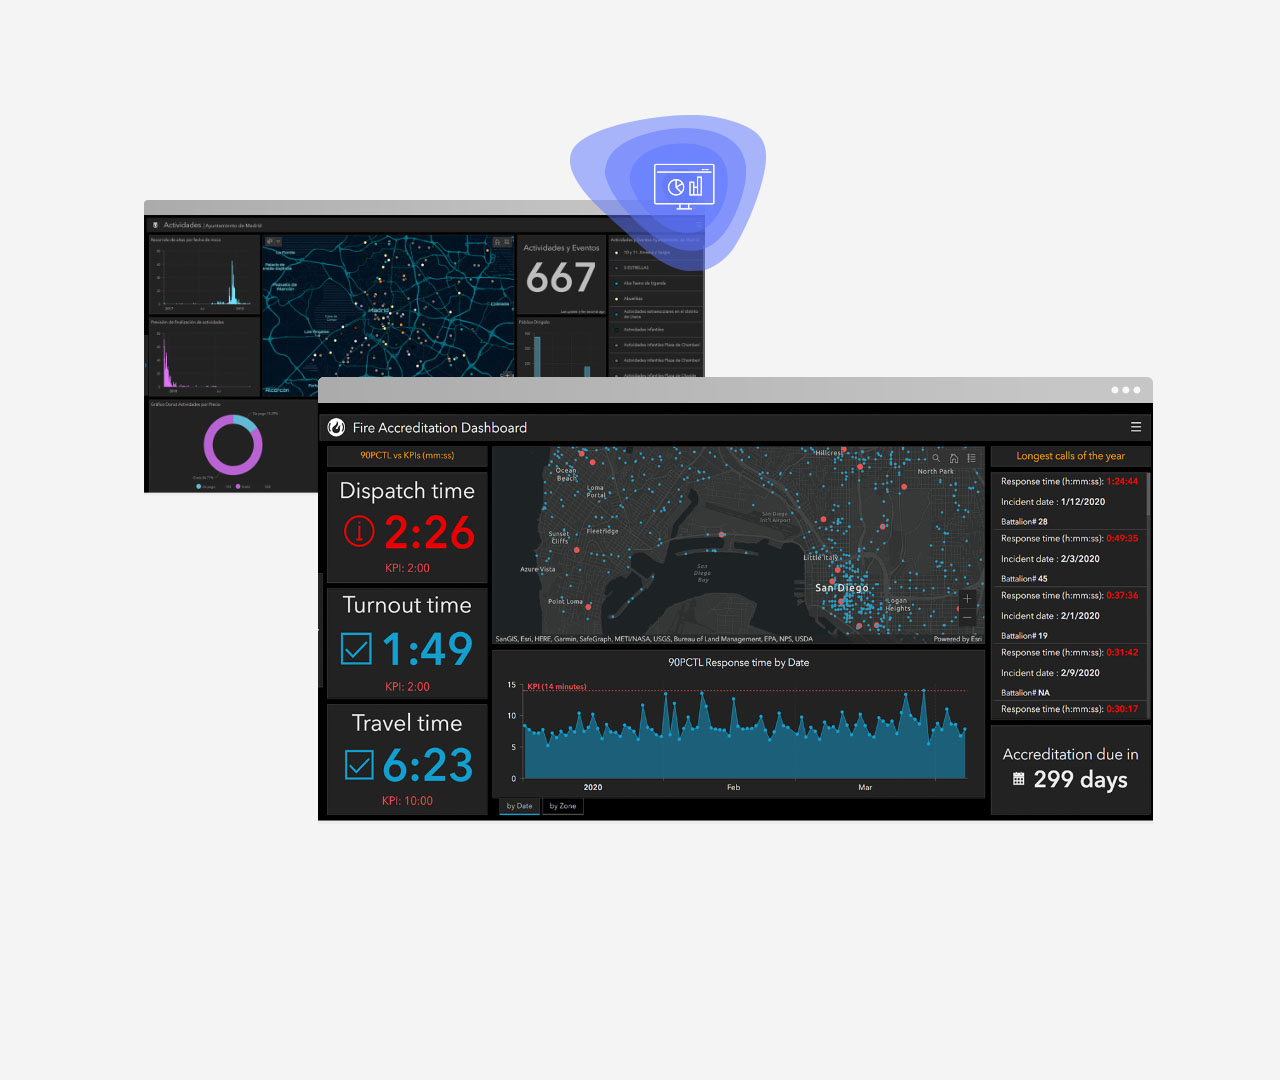 Images of dashboards in ArcGIS Dashboards